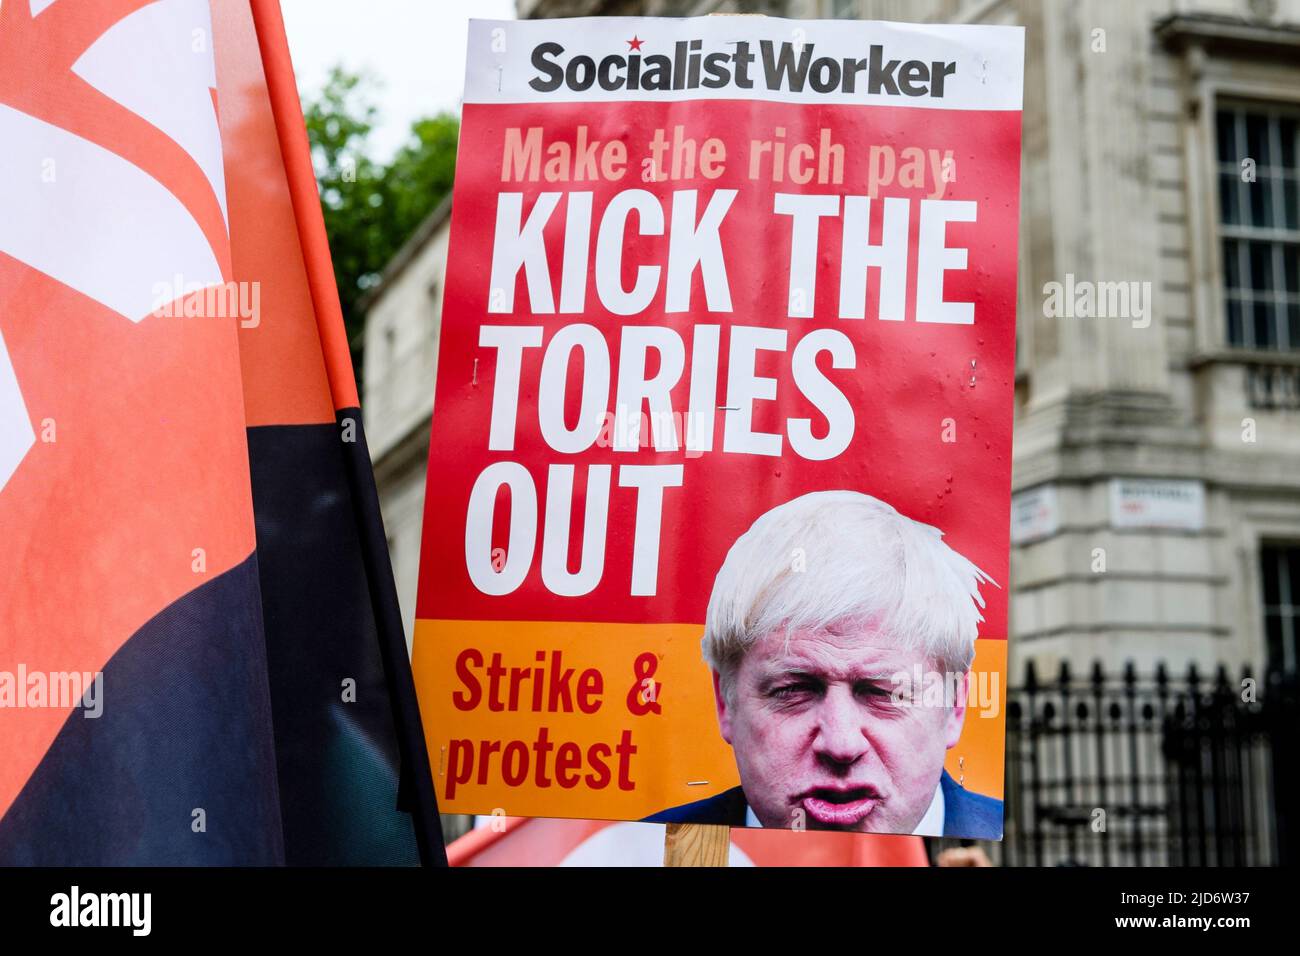 London UK, 18th May 2022. Thousands of trade union members march on the We Demand Better protest organised by the TUC against the UK government and the cost of living crisis. Anti-government placards on display throughout the protest. Stock Photo